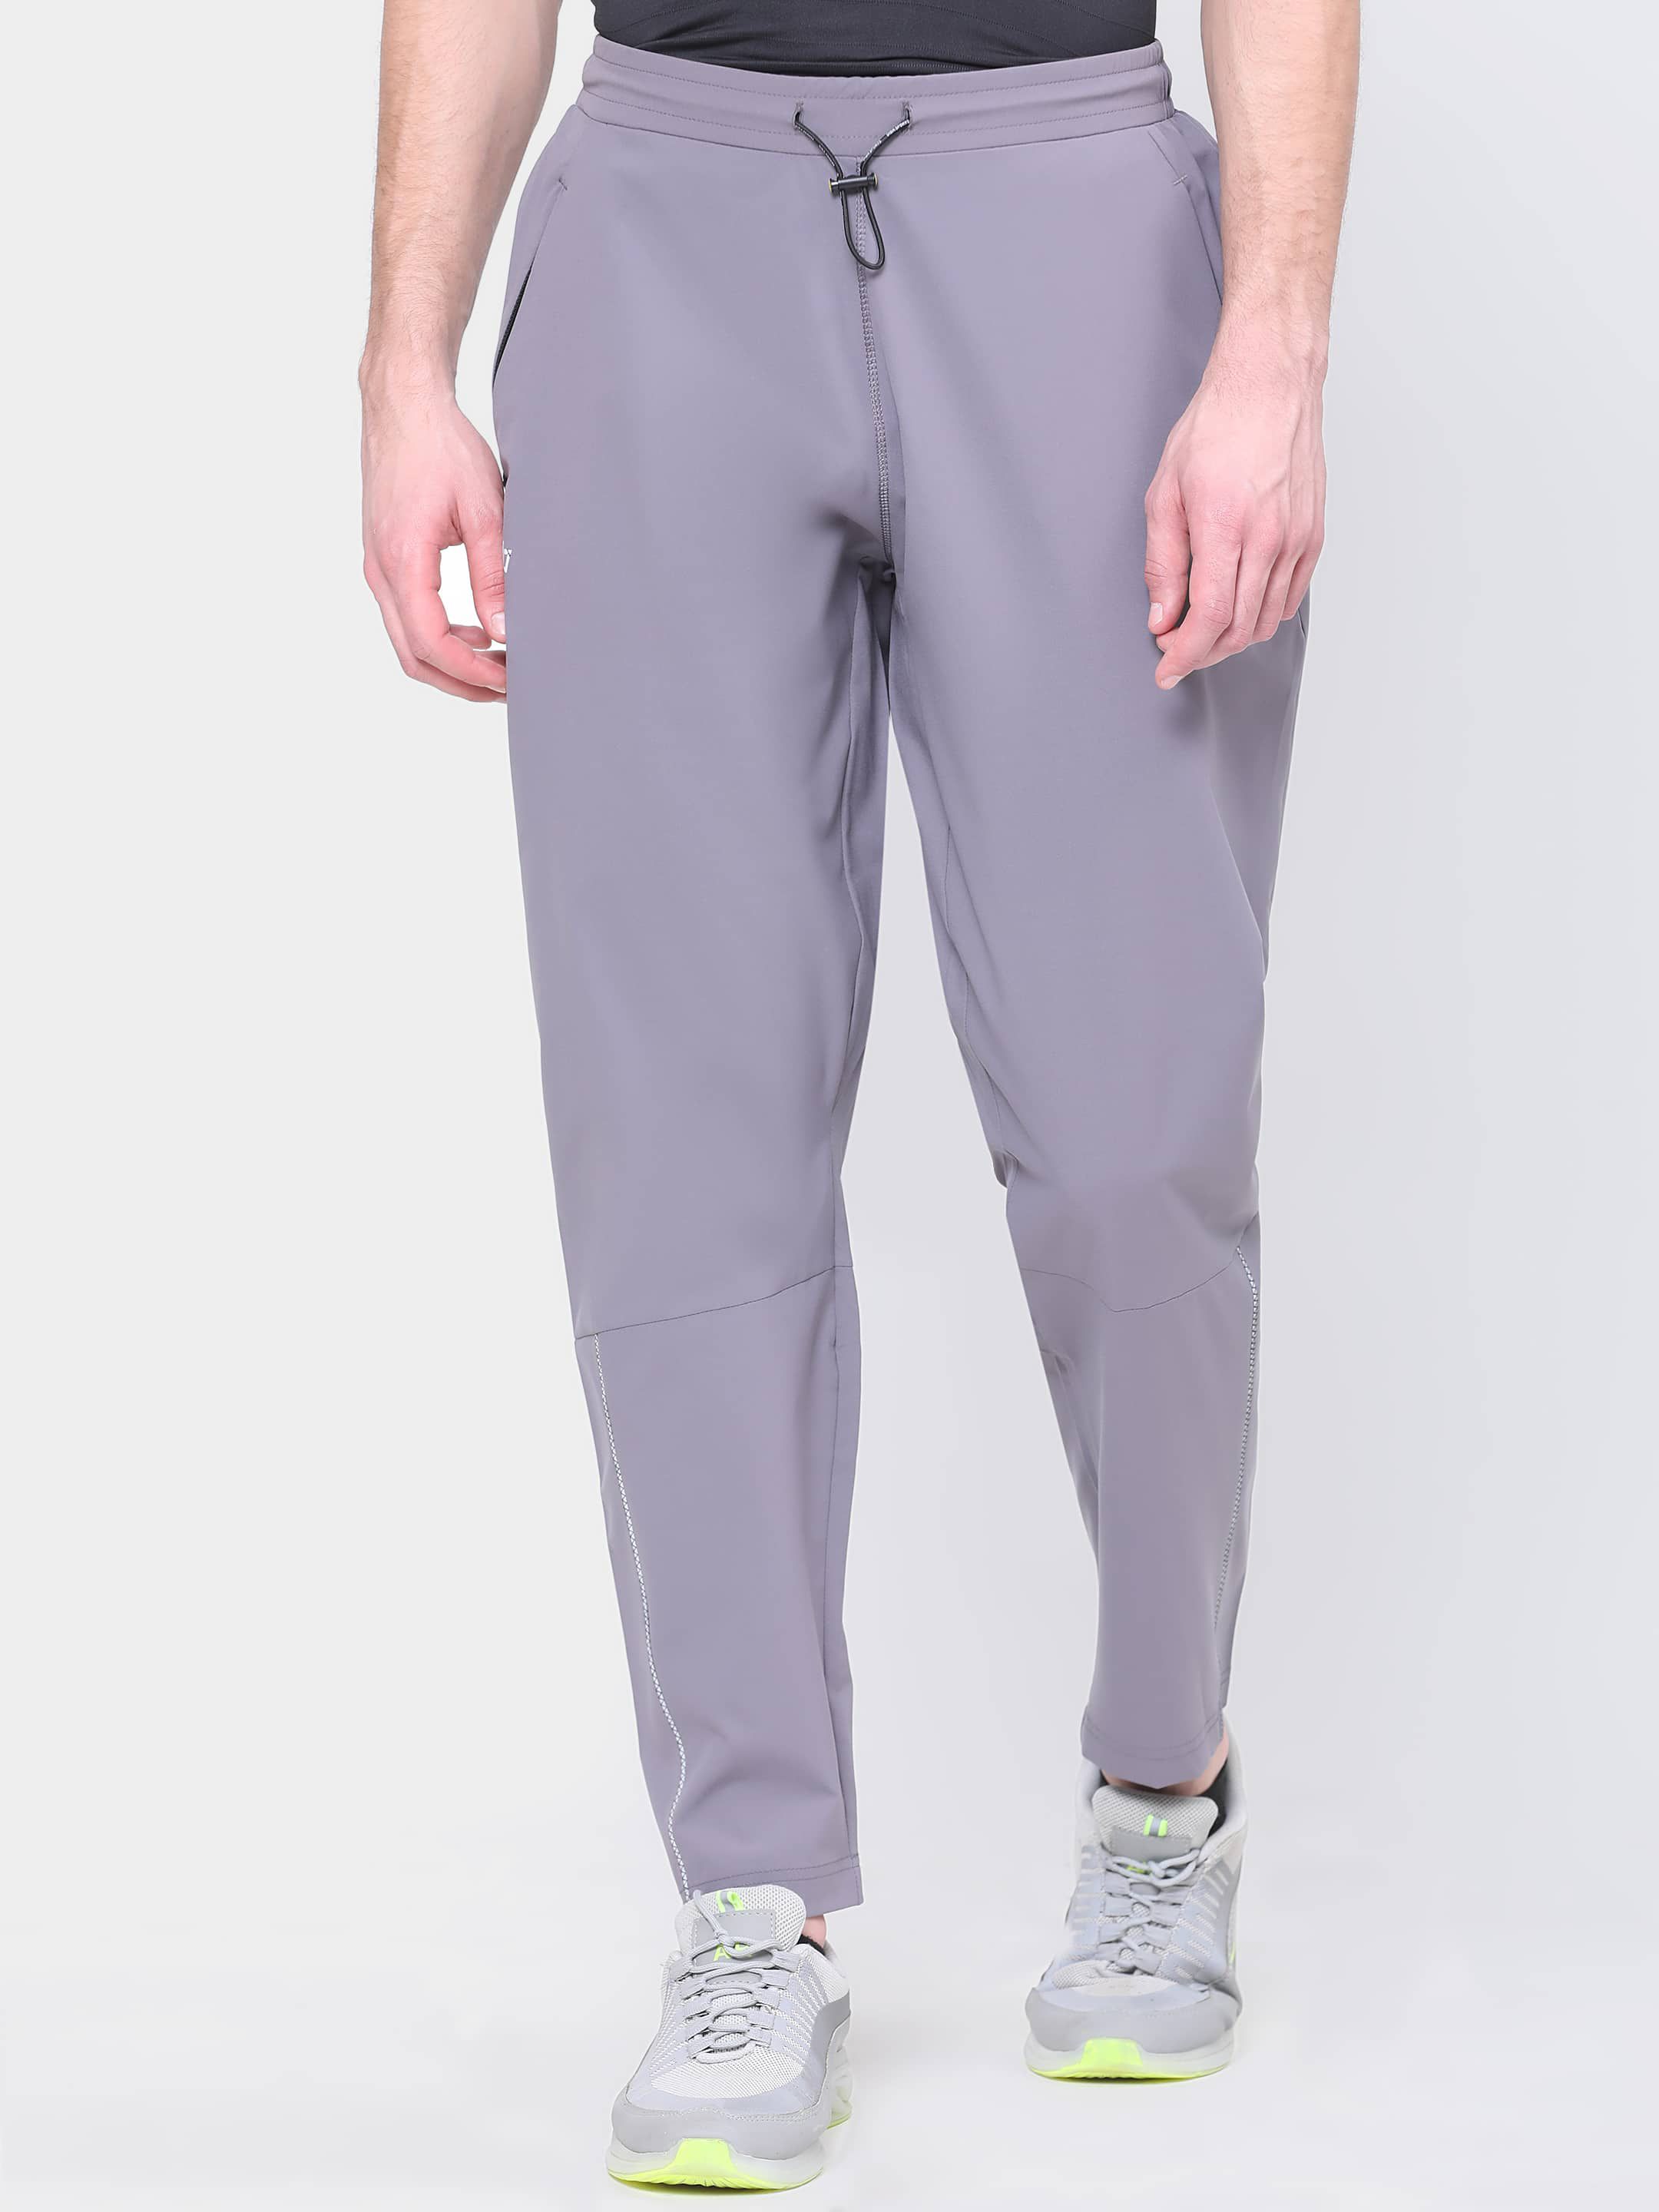     			Dida Sportswear Grey Polyester Men's Sports Trackpants ( Pack of 1 )